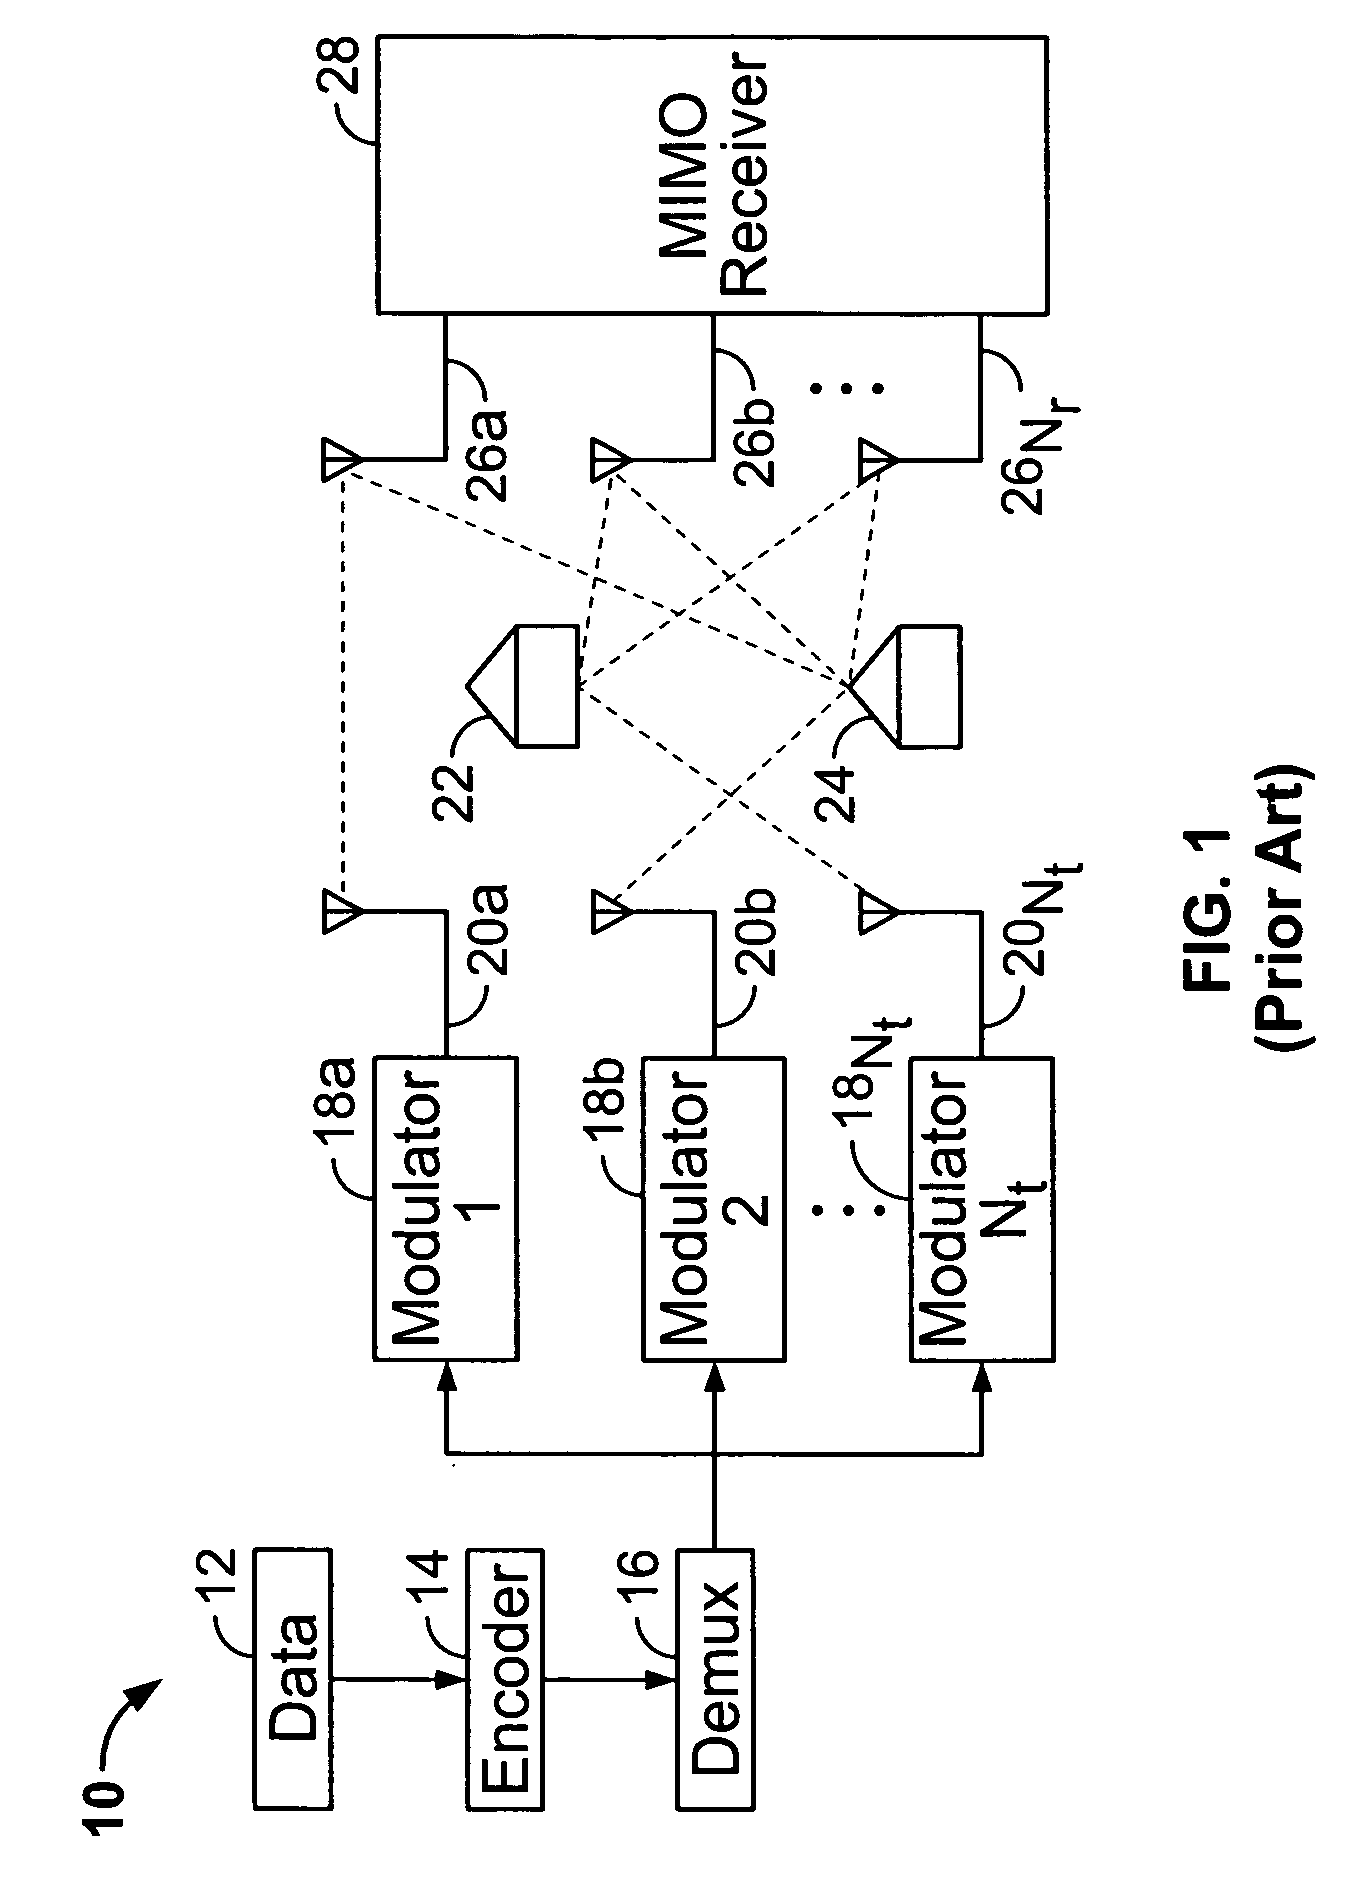 Recursive and trellis-based feedback reduction for MIMO-OFDM with rate-limited feedback